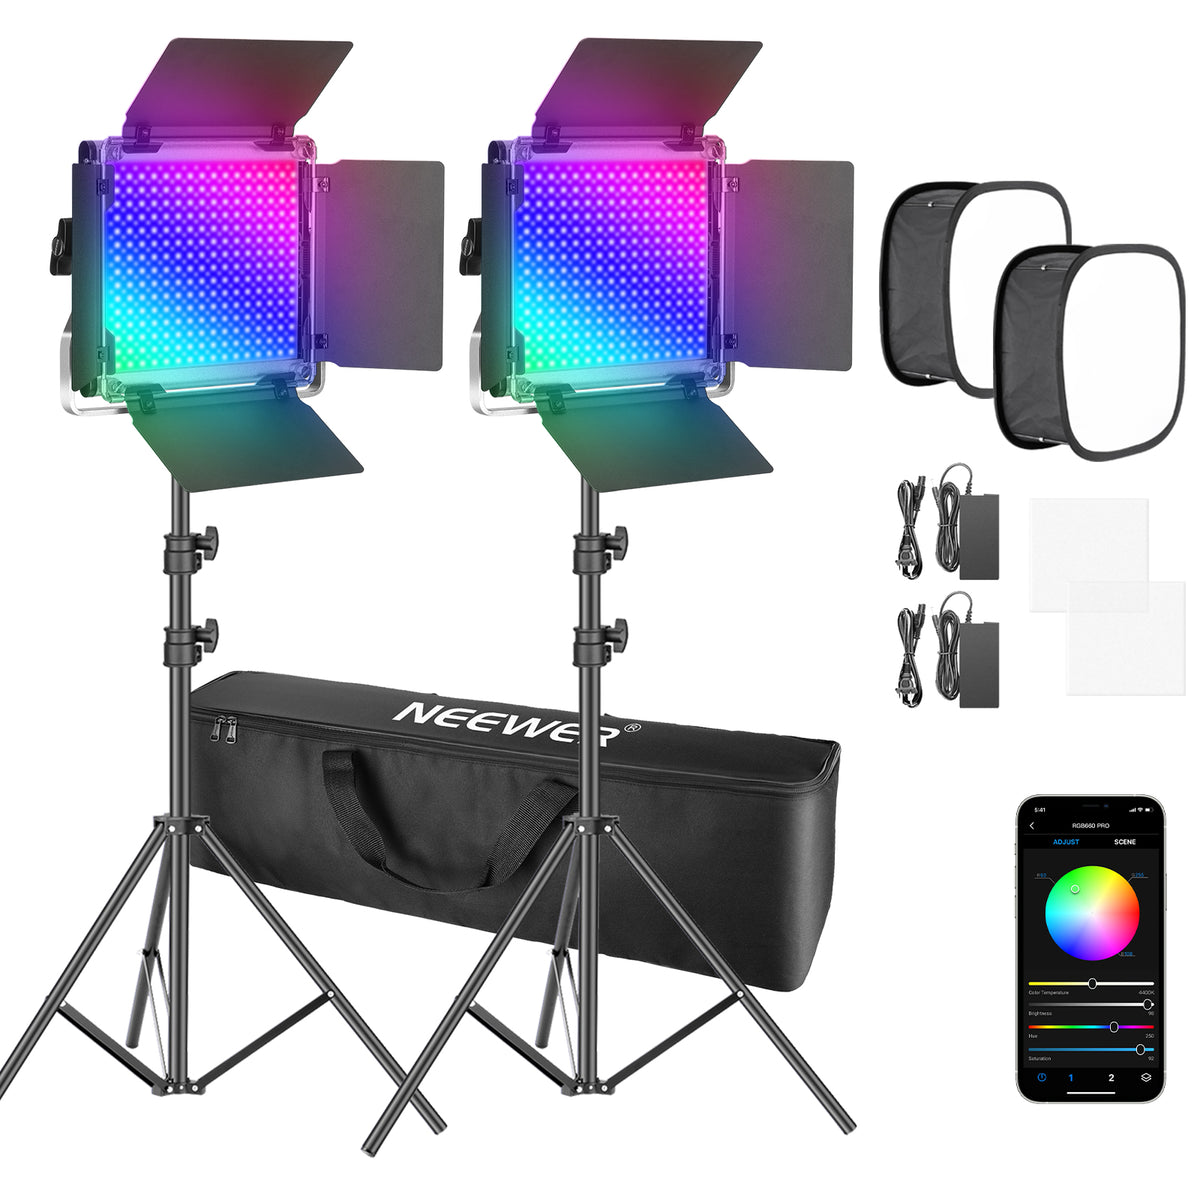 NEEWER 2 Packs RGB PRO LED Video Light Kit with Softboxes